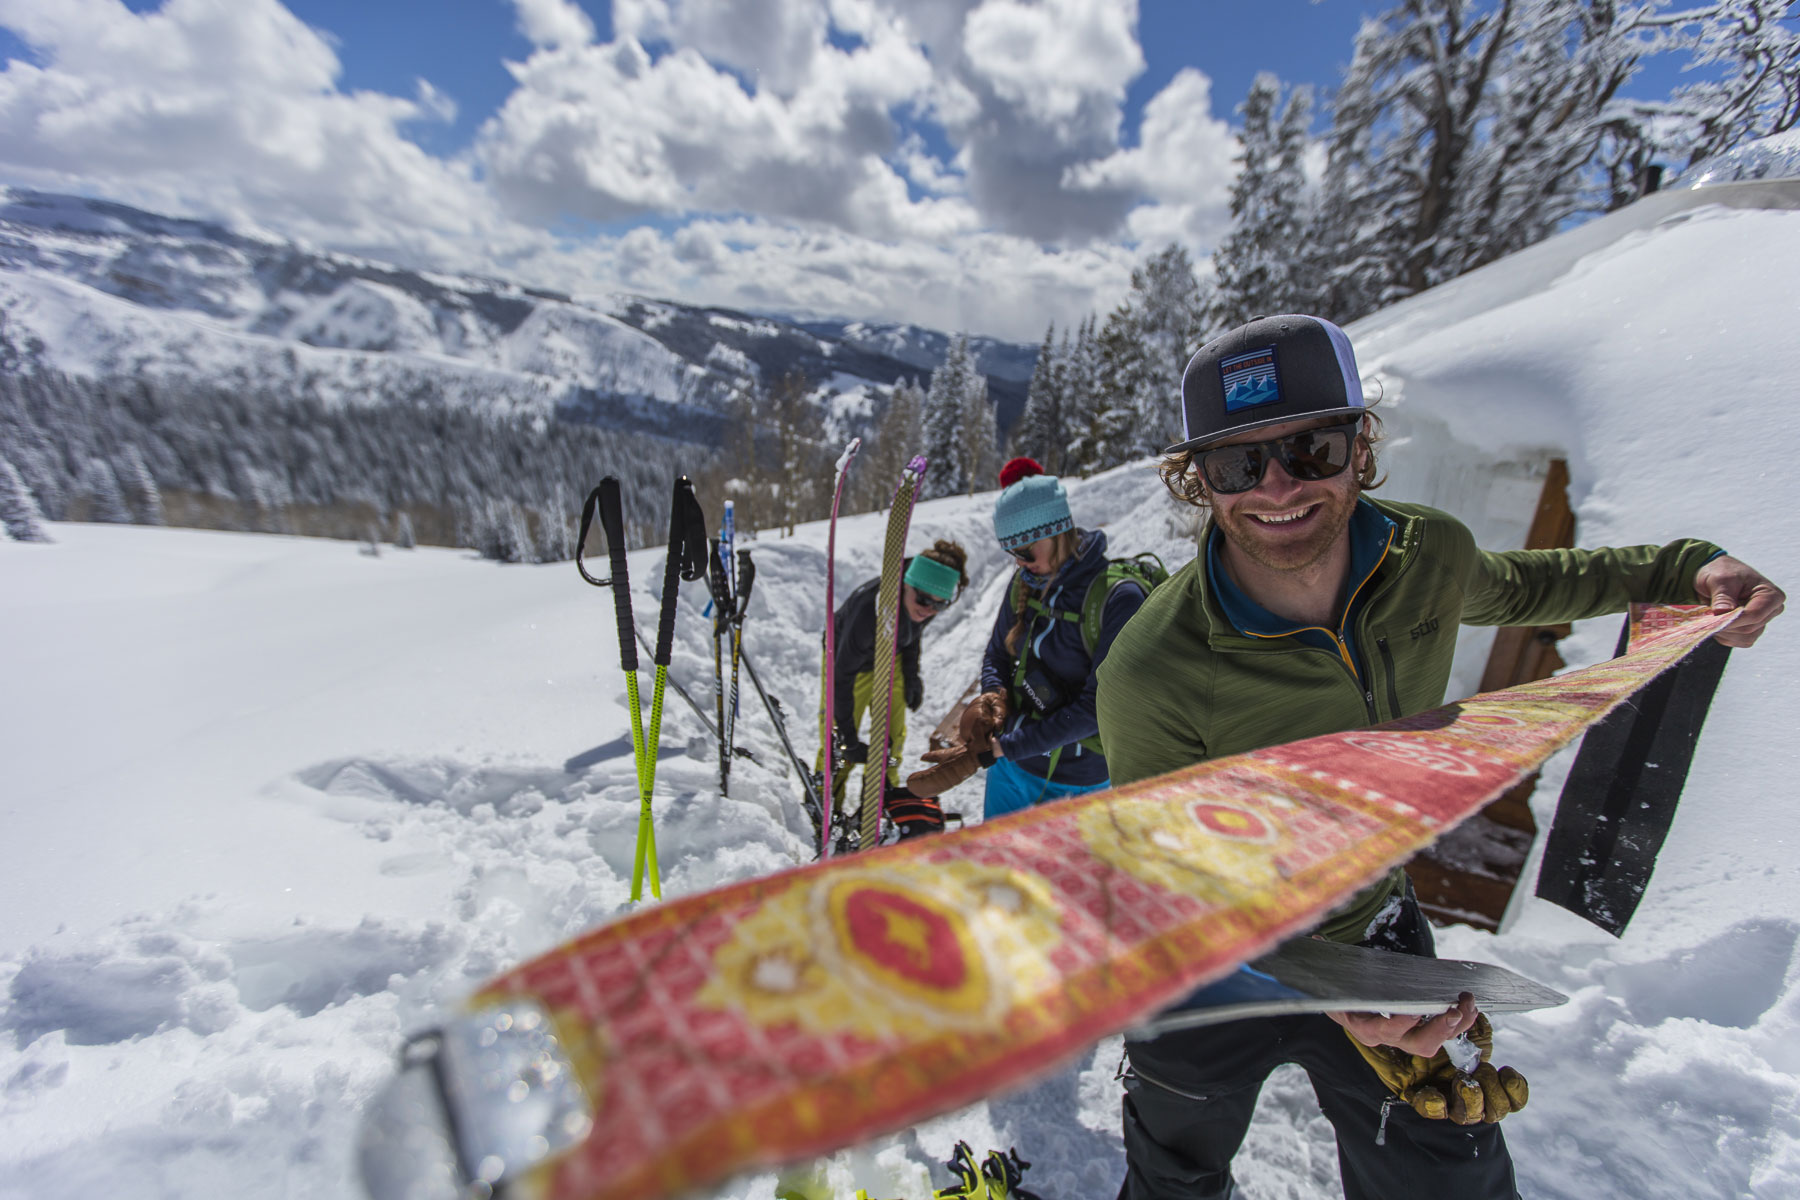 Smiling Jackson Hole Backcountry Guide Holding Climbing Skins with Two Skiers